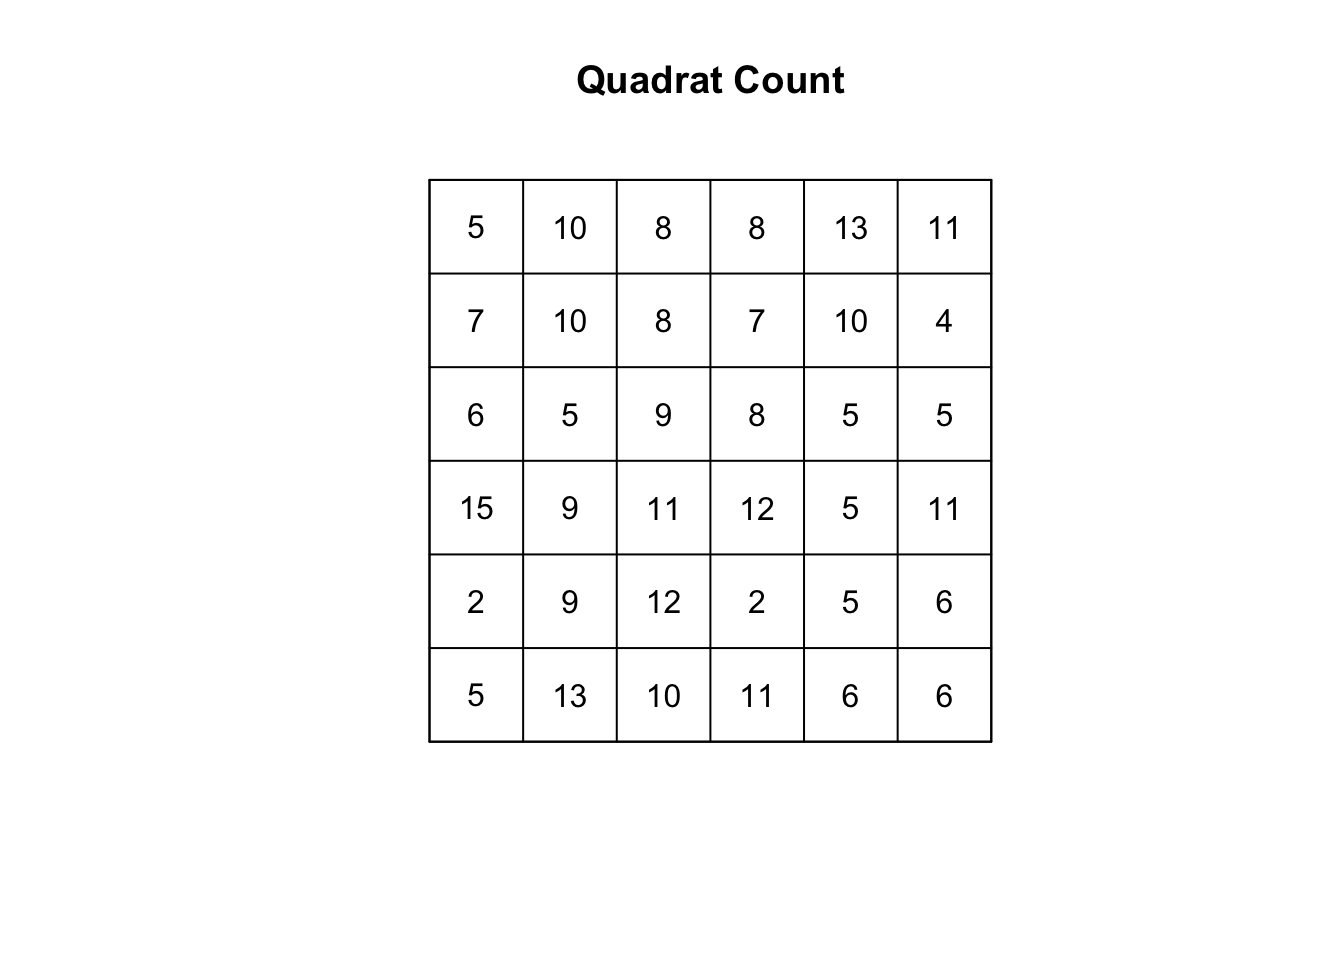 A six by six grid with numbers in each cell, titled 'Quadrat Count'. The numbers range from two to fifteen, with no particular pattern.